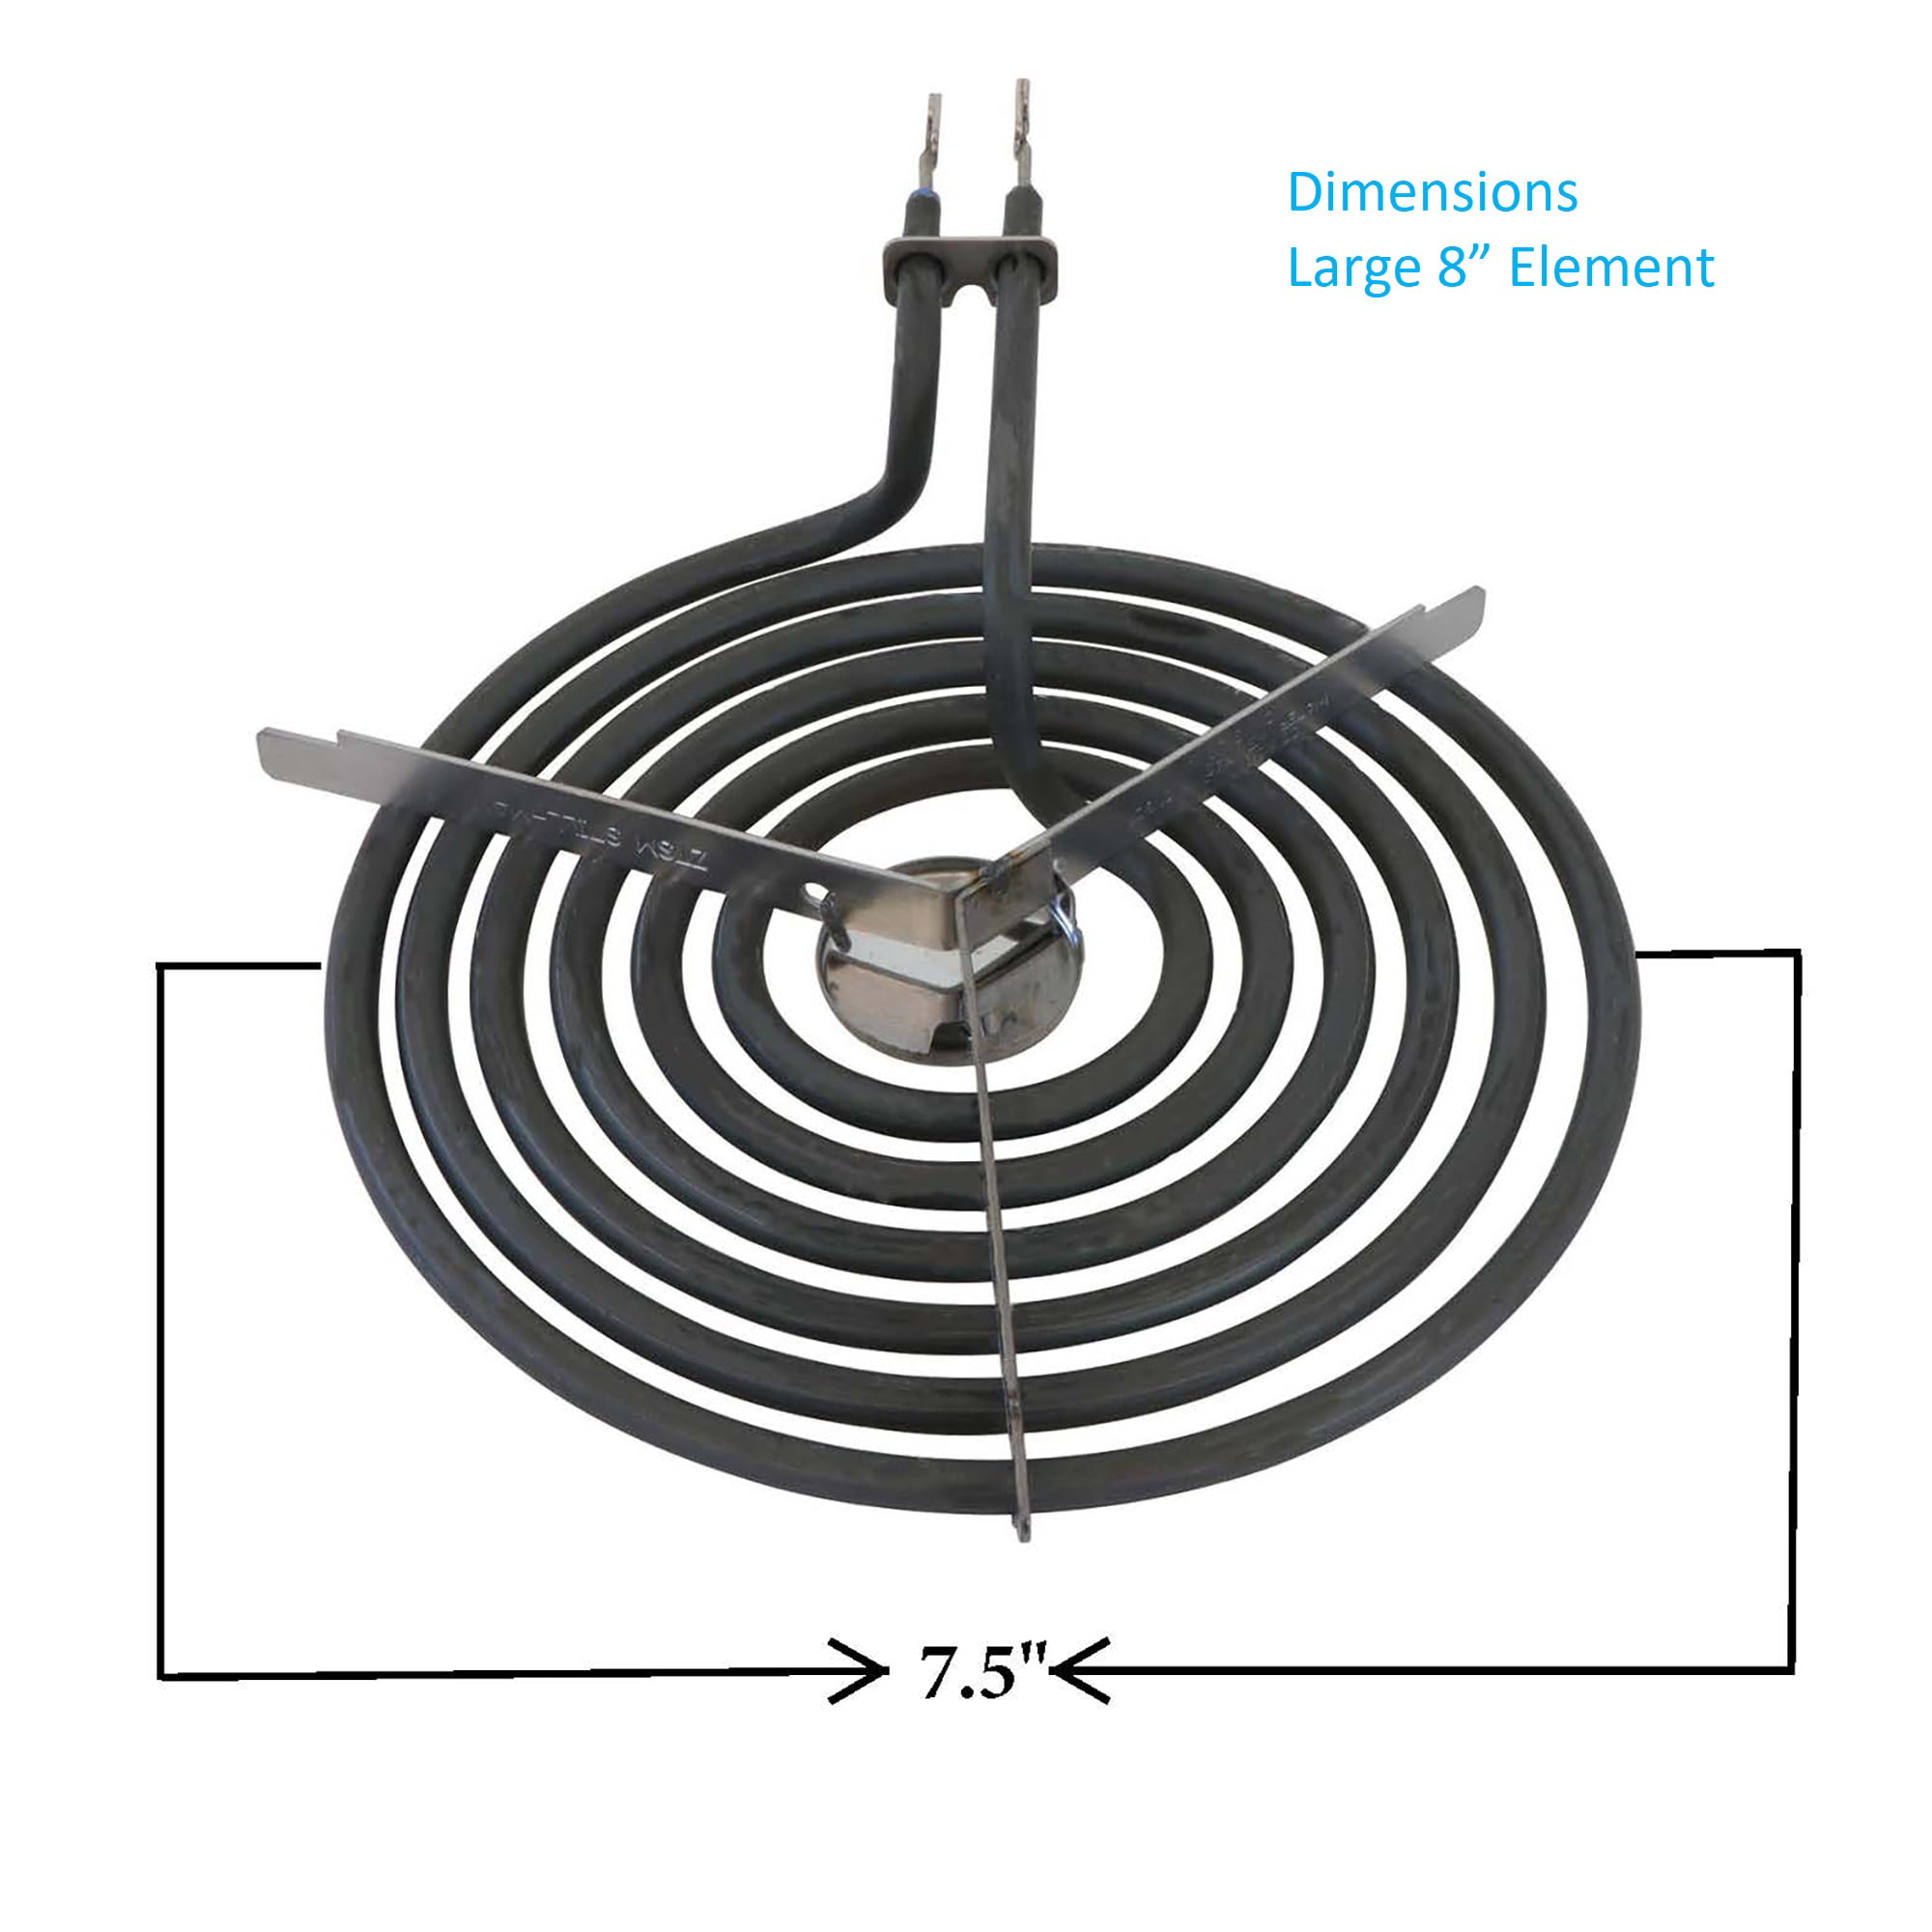 Compatible with GE Hotpoint Range Stove WB31M20 WB31M19 Porcelain Drip Pans and WB30M1 WB30M2 Surface Elements by SupHomie 